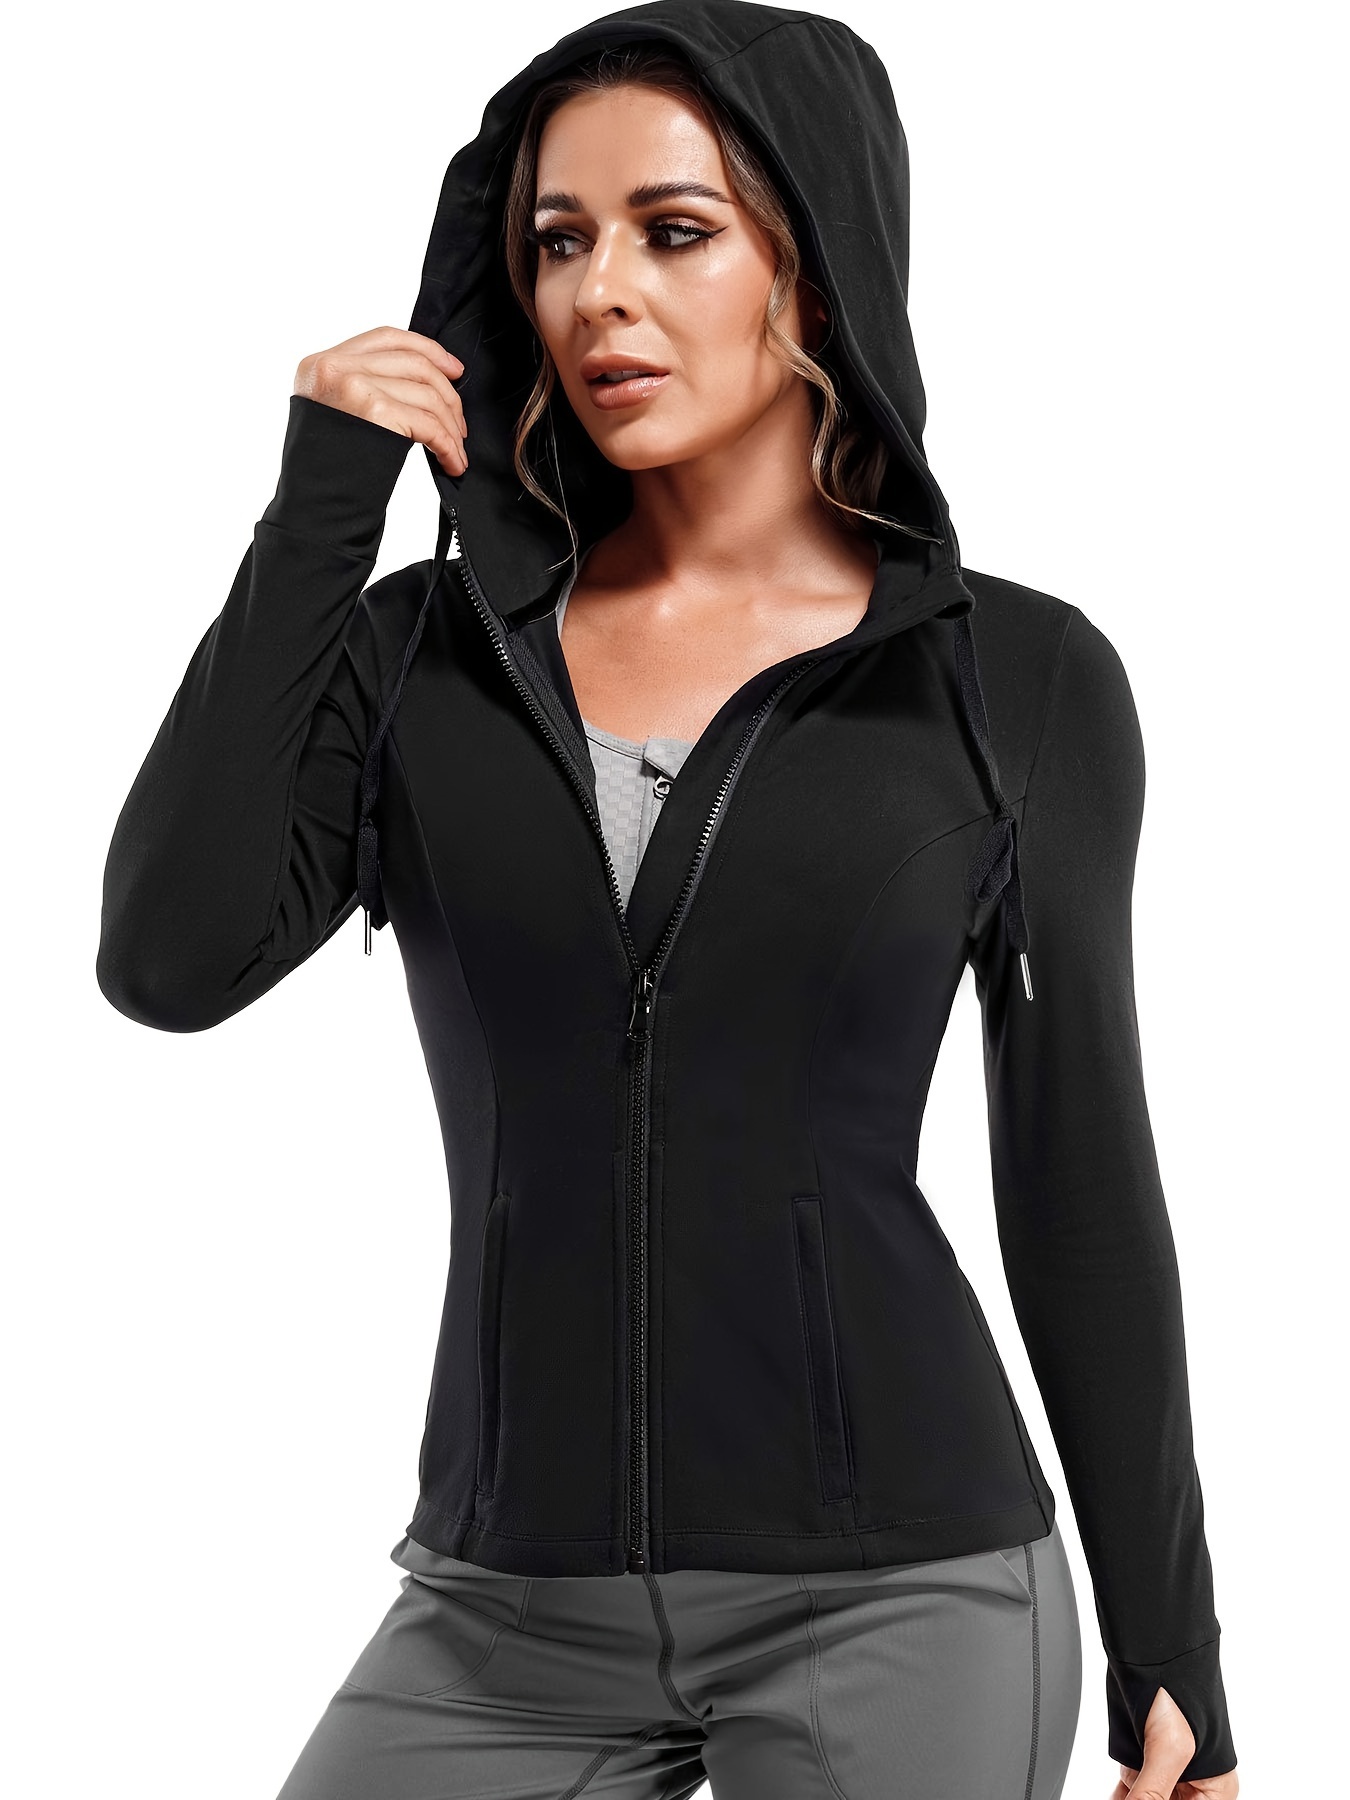 New Look Womens High Neck Slim Fit Ribbed Zip Up Athletic Lightweight  Running Hoodie Womens With Thumbholes From Smartears, $19.4